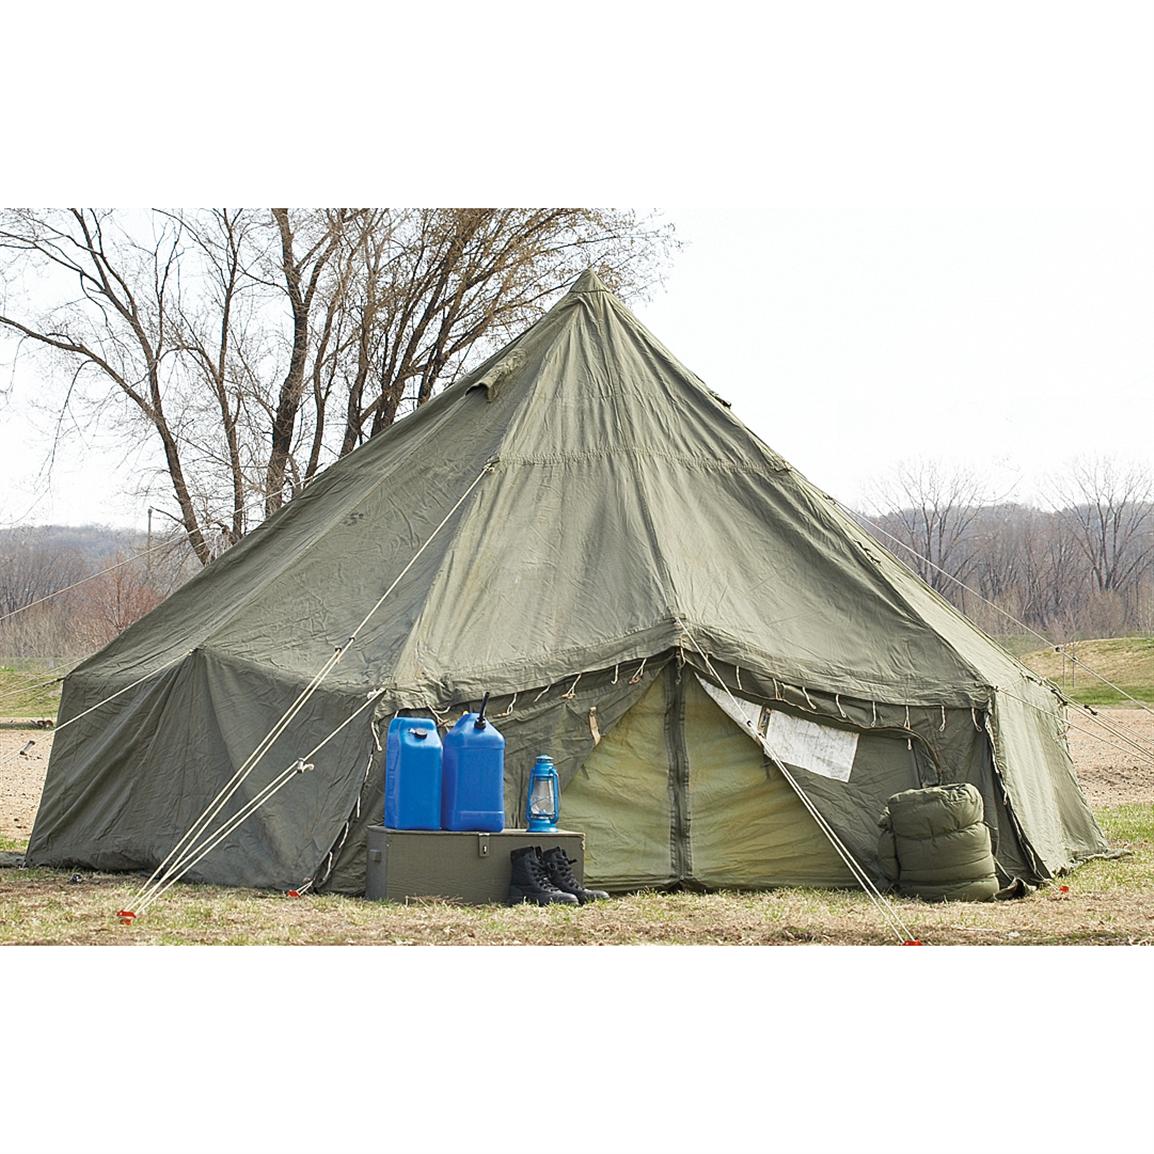 Army Tent Canvas - Army Military